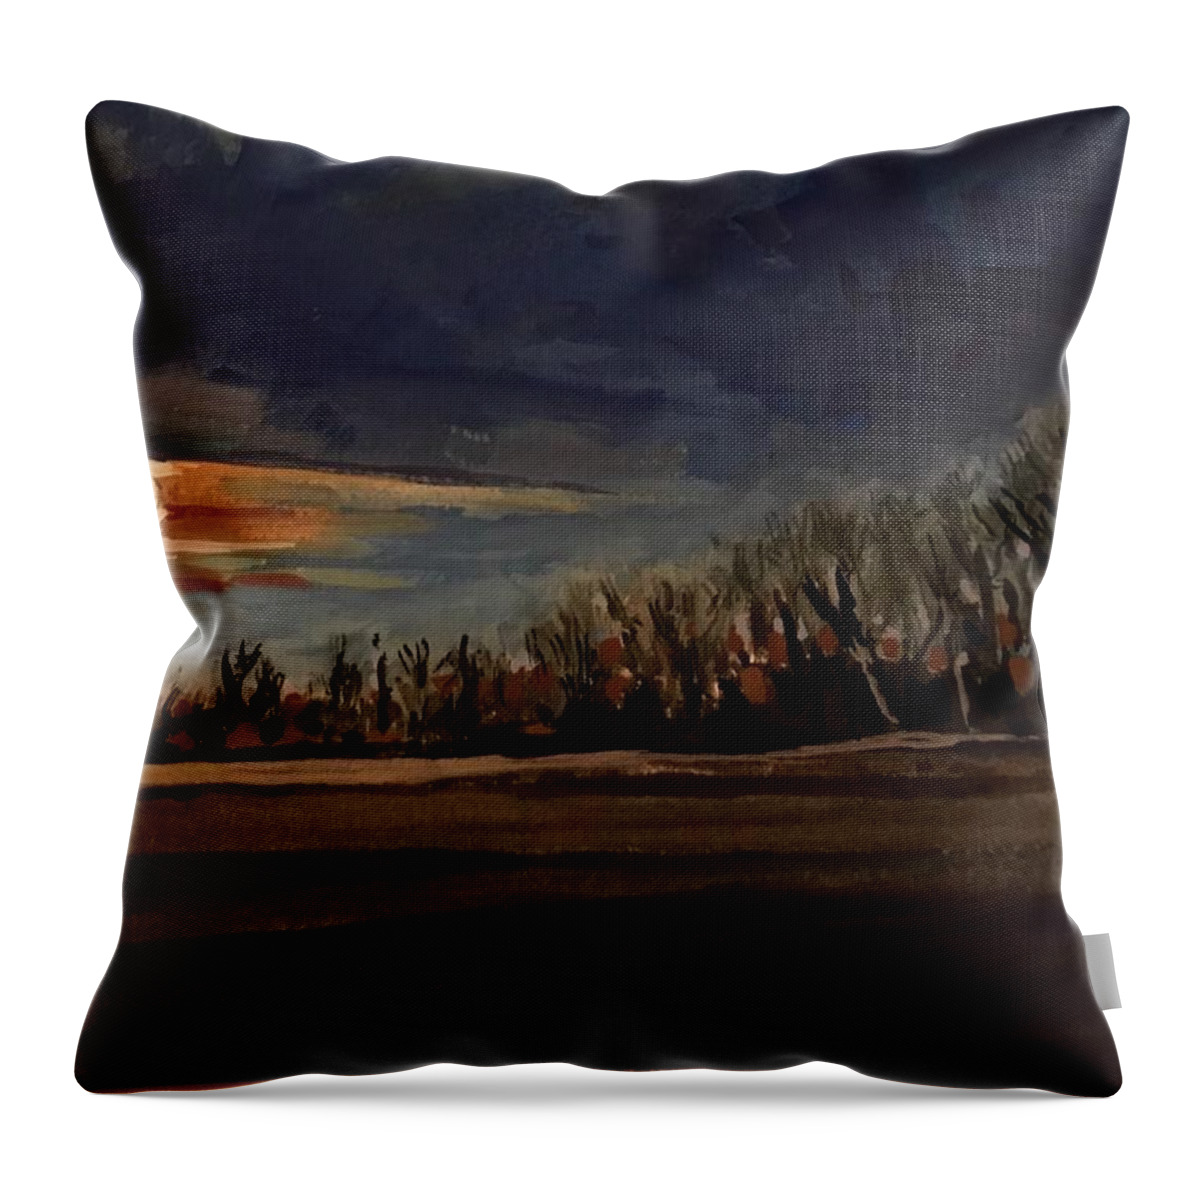 Moon Throw Pillow featuring the painting Moonset study by Les Herman